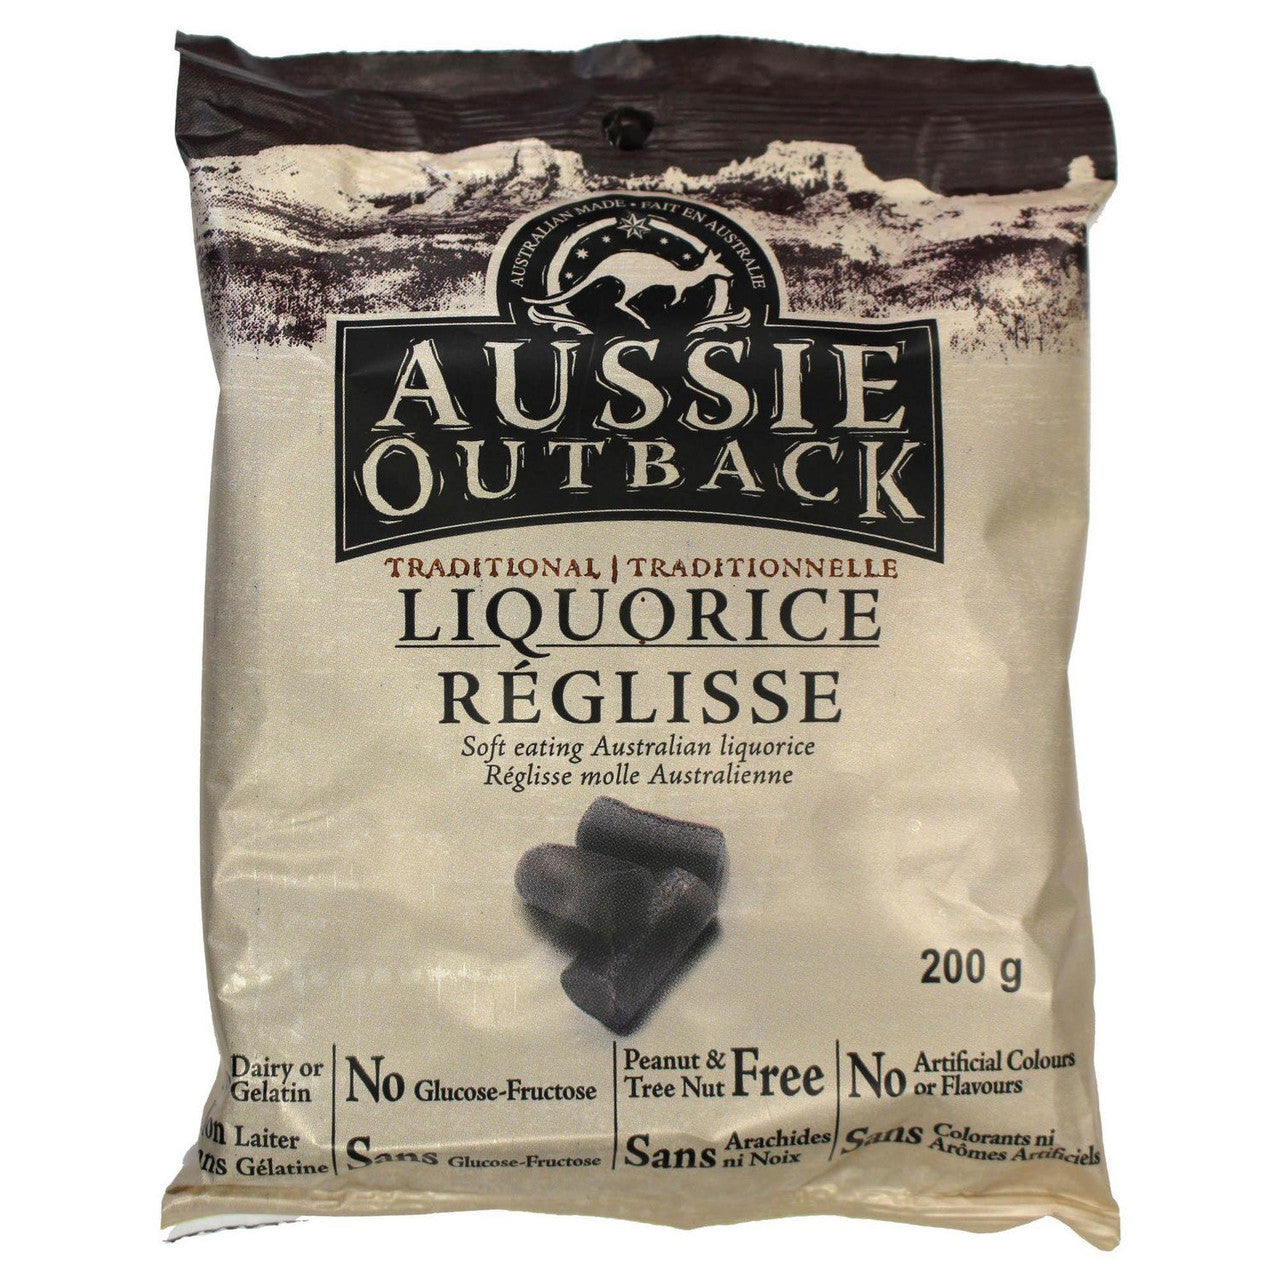 Aussie Outback Traditional soft eating Australian liquorice, 200g/7.1 oz., {Imported from Canada}